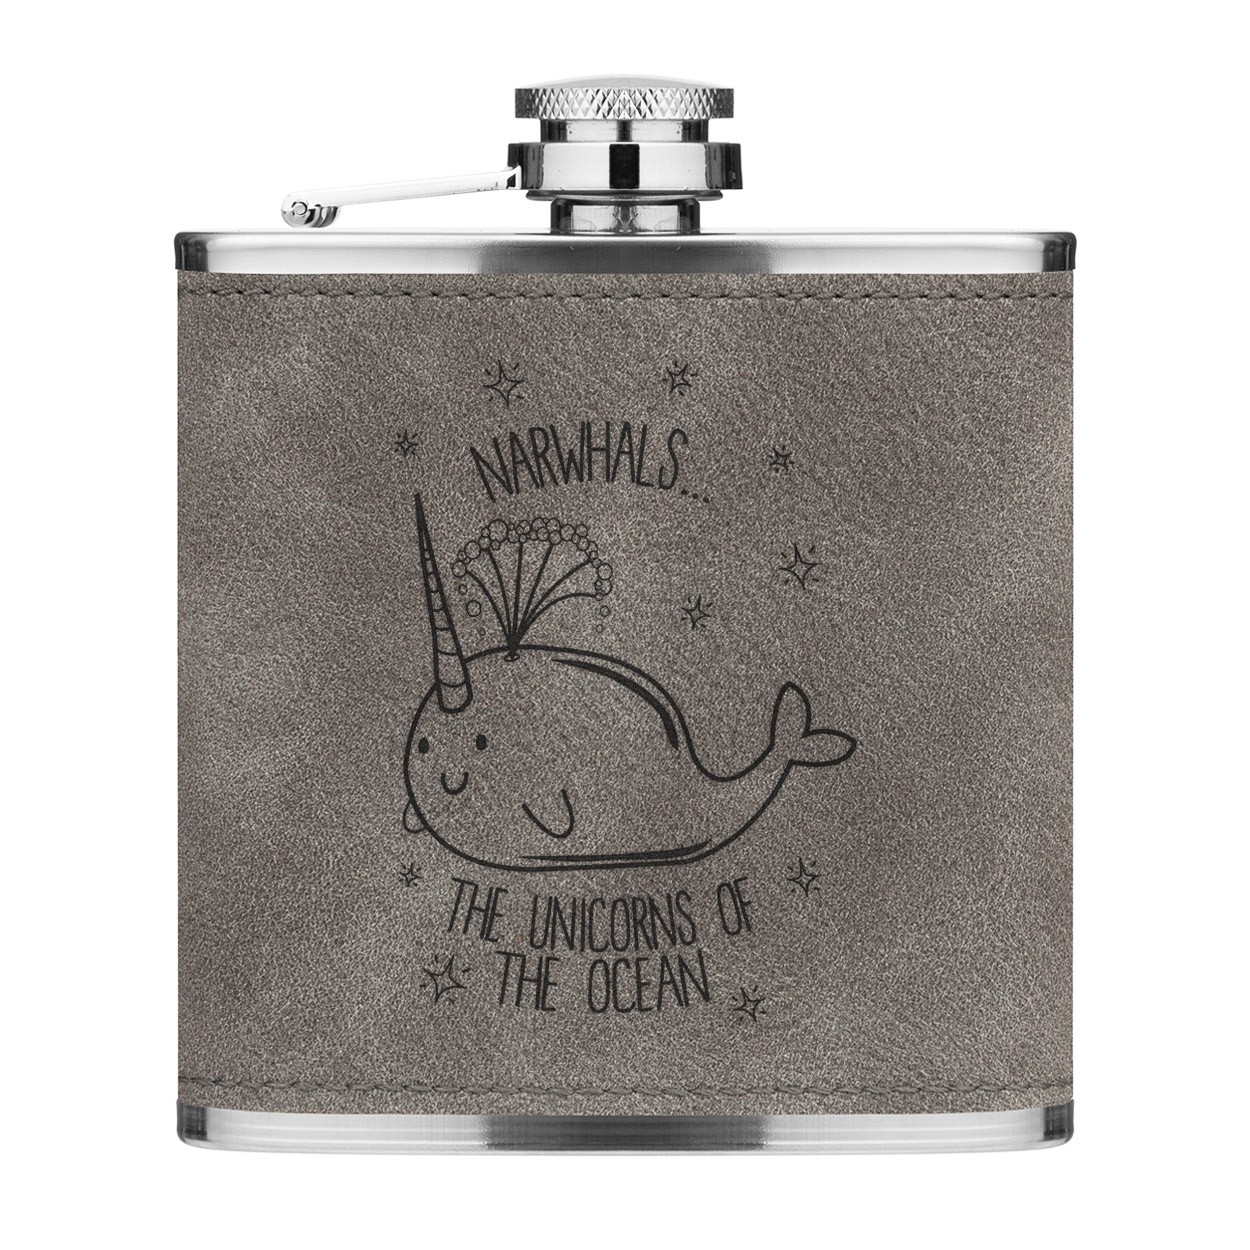 Narwhals The Unicorns Of The Ocean 6oz PU Leather Hip Flask Grey Luxe